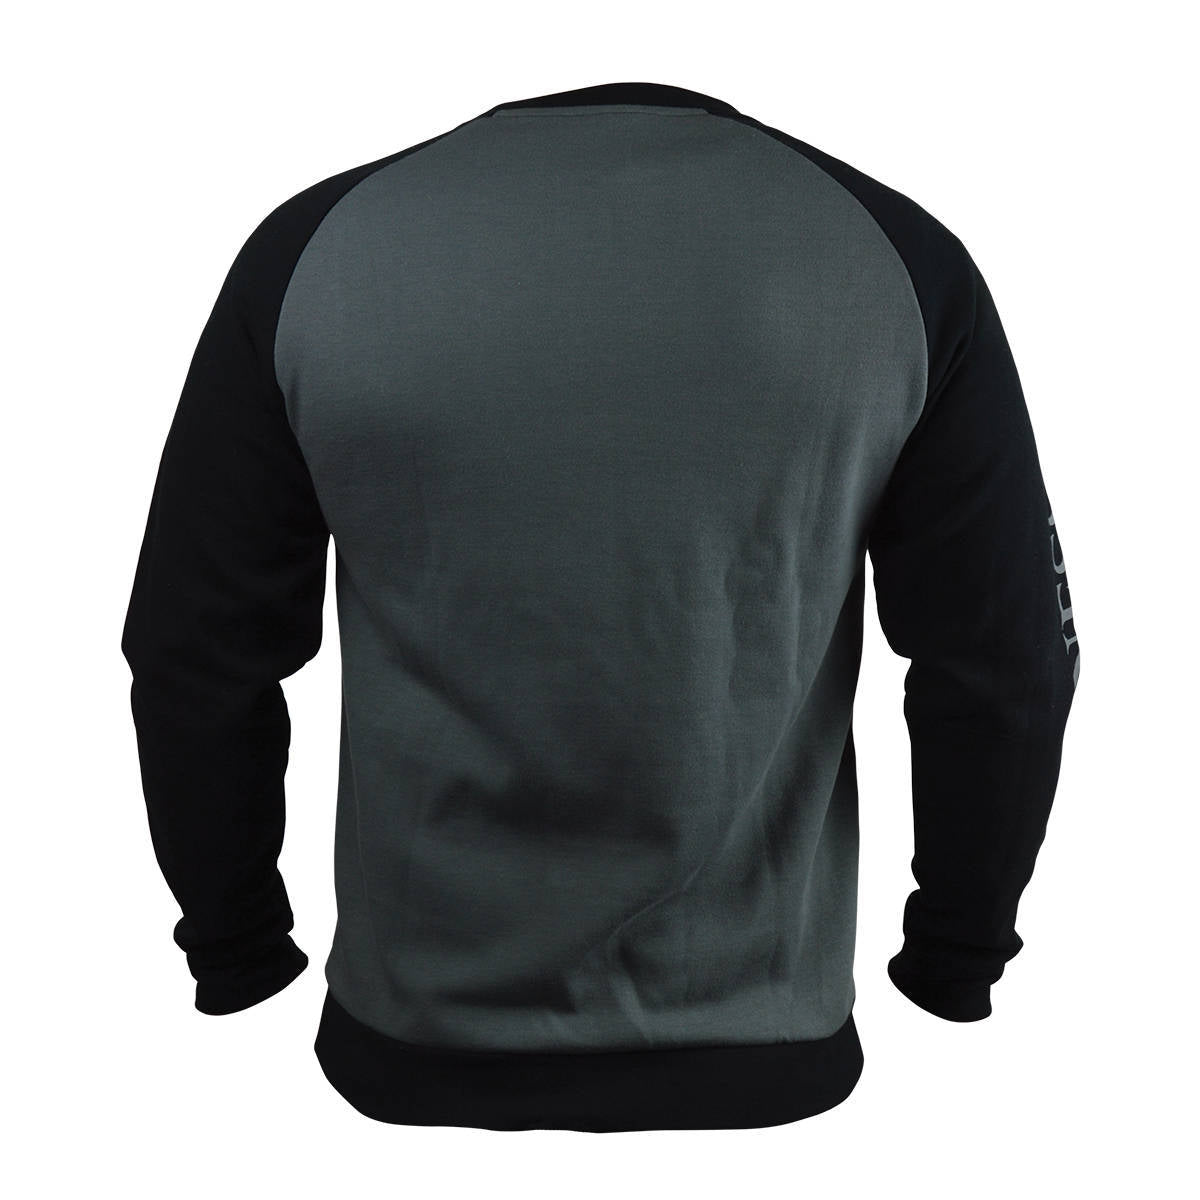 The unisex back view of a man wearing a Guinness Long Sleeve Sweater, which is a mid-weight grey and black sweatshirt.